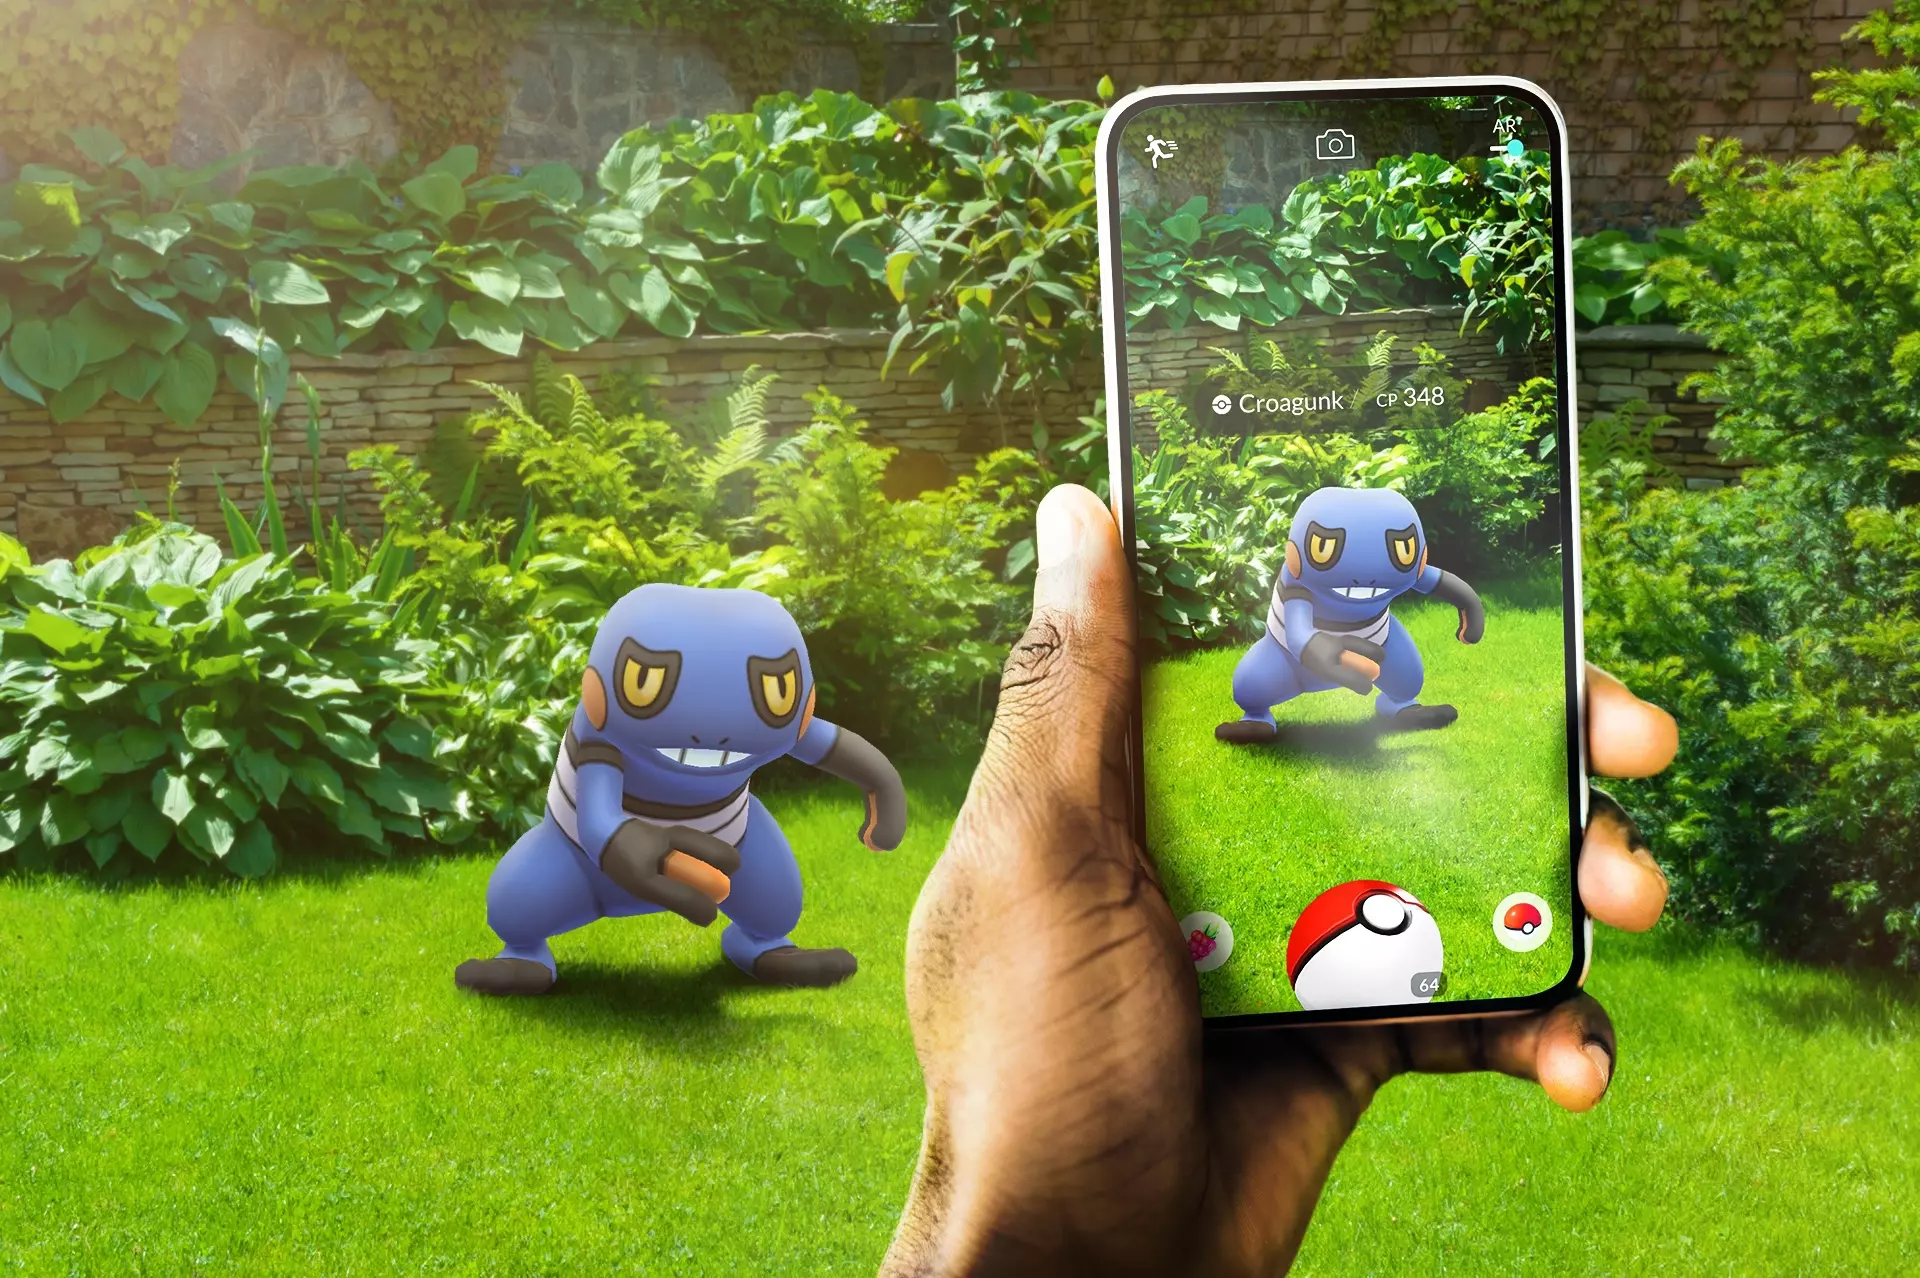 An advertisement for Pokemon Go showing a Pokemon in Augmented Reality on a mobile phone screen that has a poke ball.